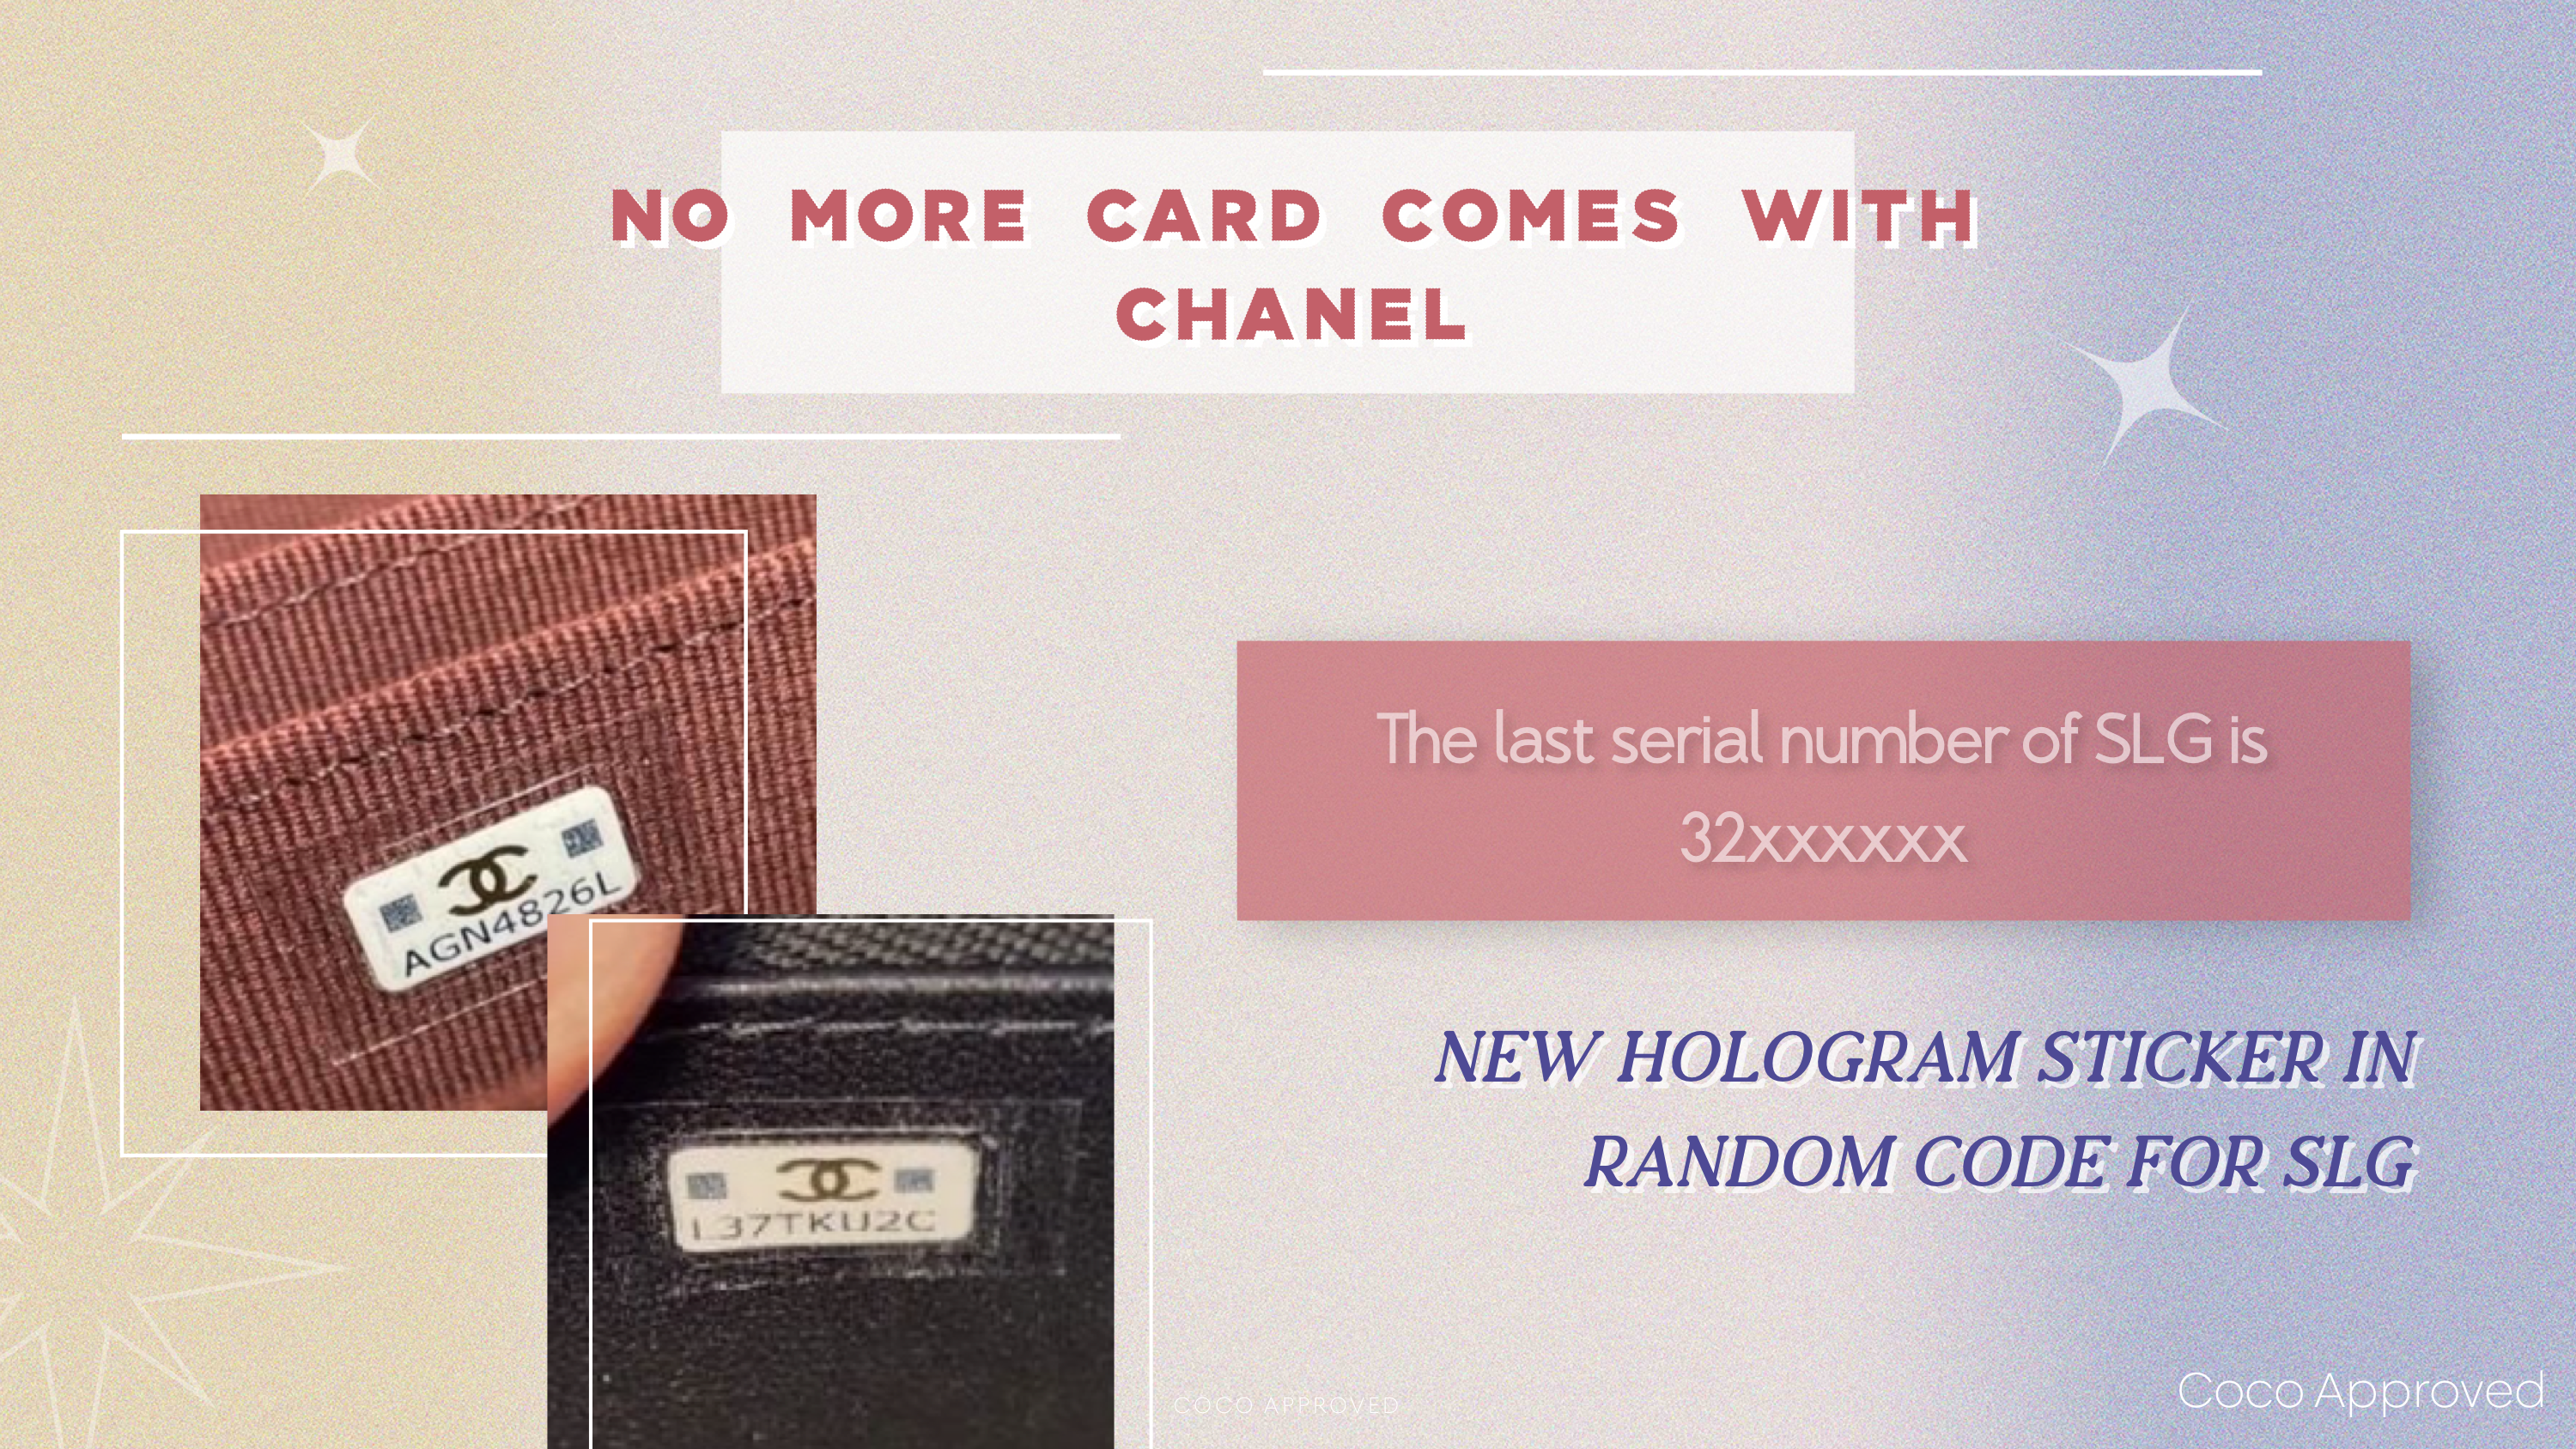 Chanel Swaps Authenticity Cards for Microchips